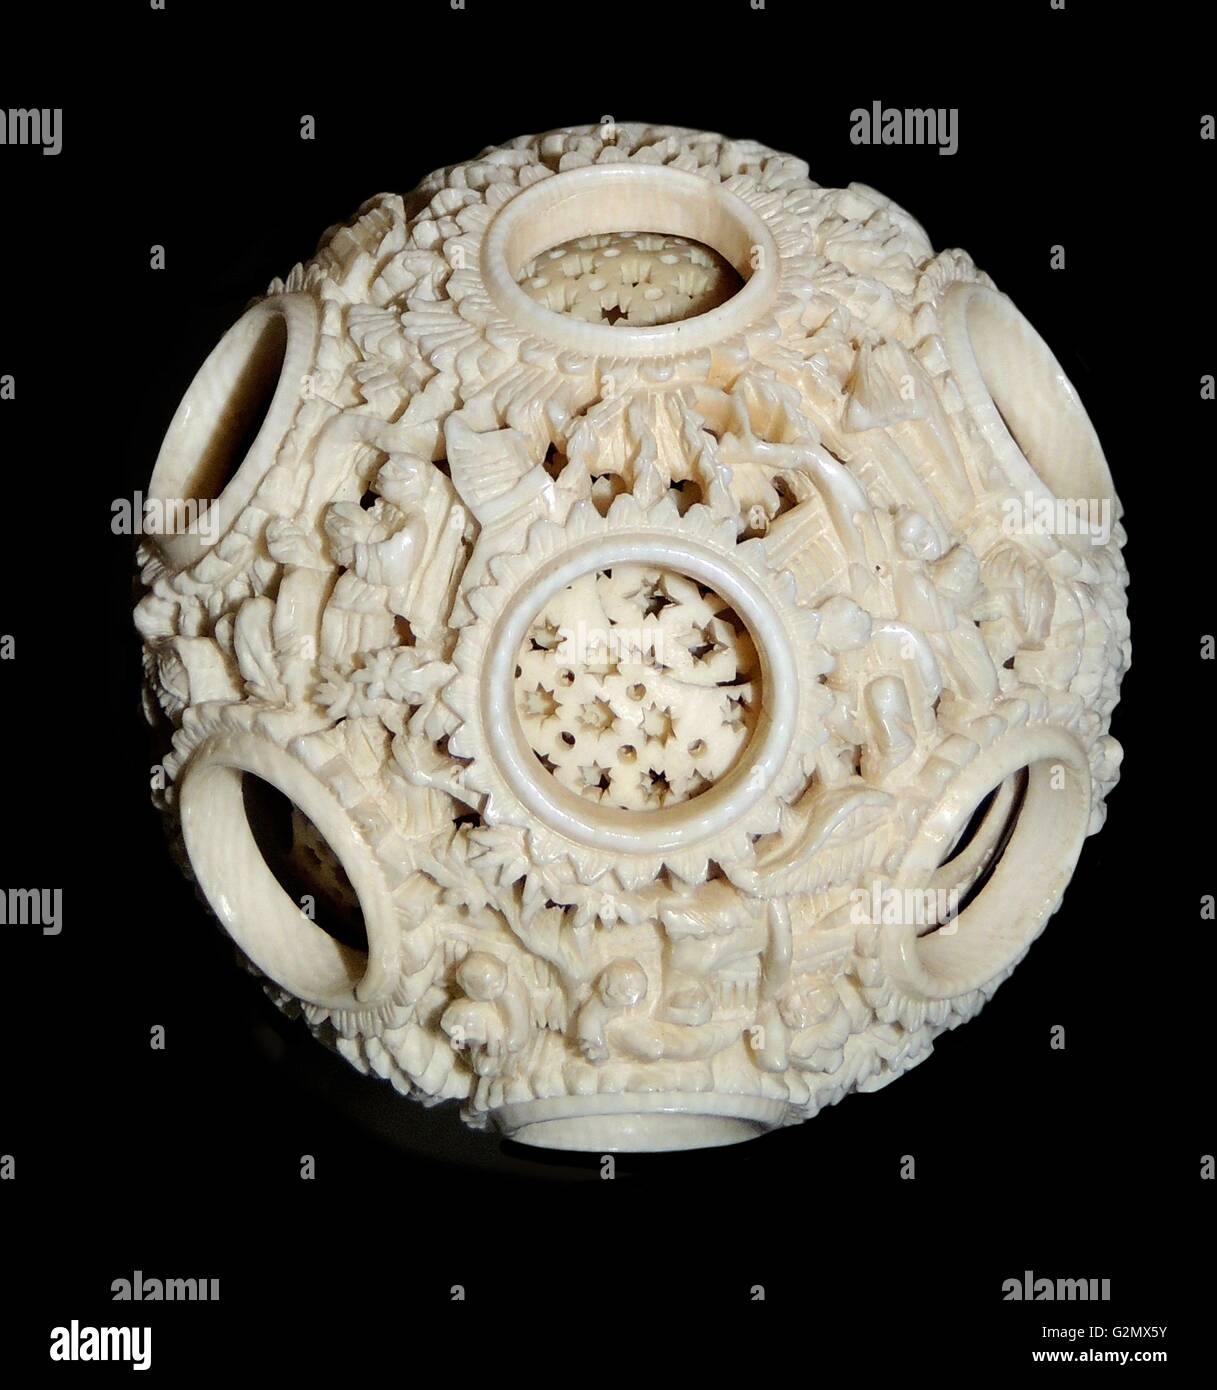 Carved ivory ball, composed of 12 freely moveable concentric spheres. Qing dynasty, 19th century AD. During this period the craftsmen were obsessed with exploring their technical limits and ivory provided a particularly suitable medium for this. Stock Photo